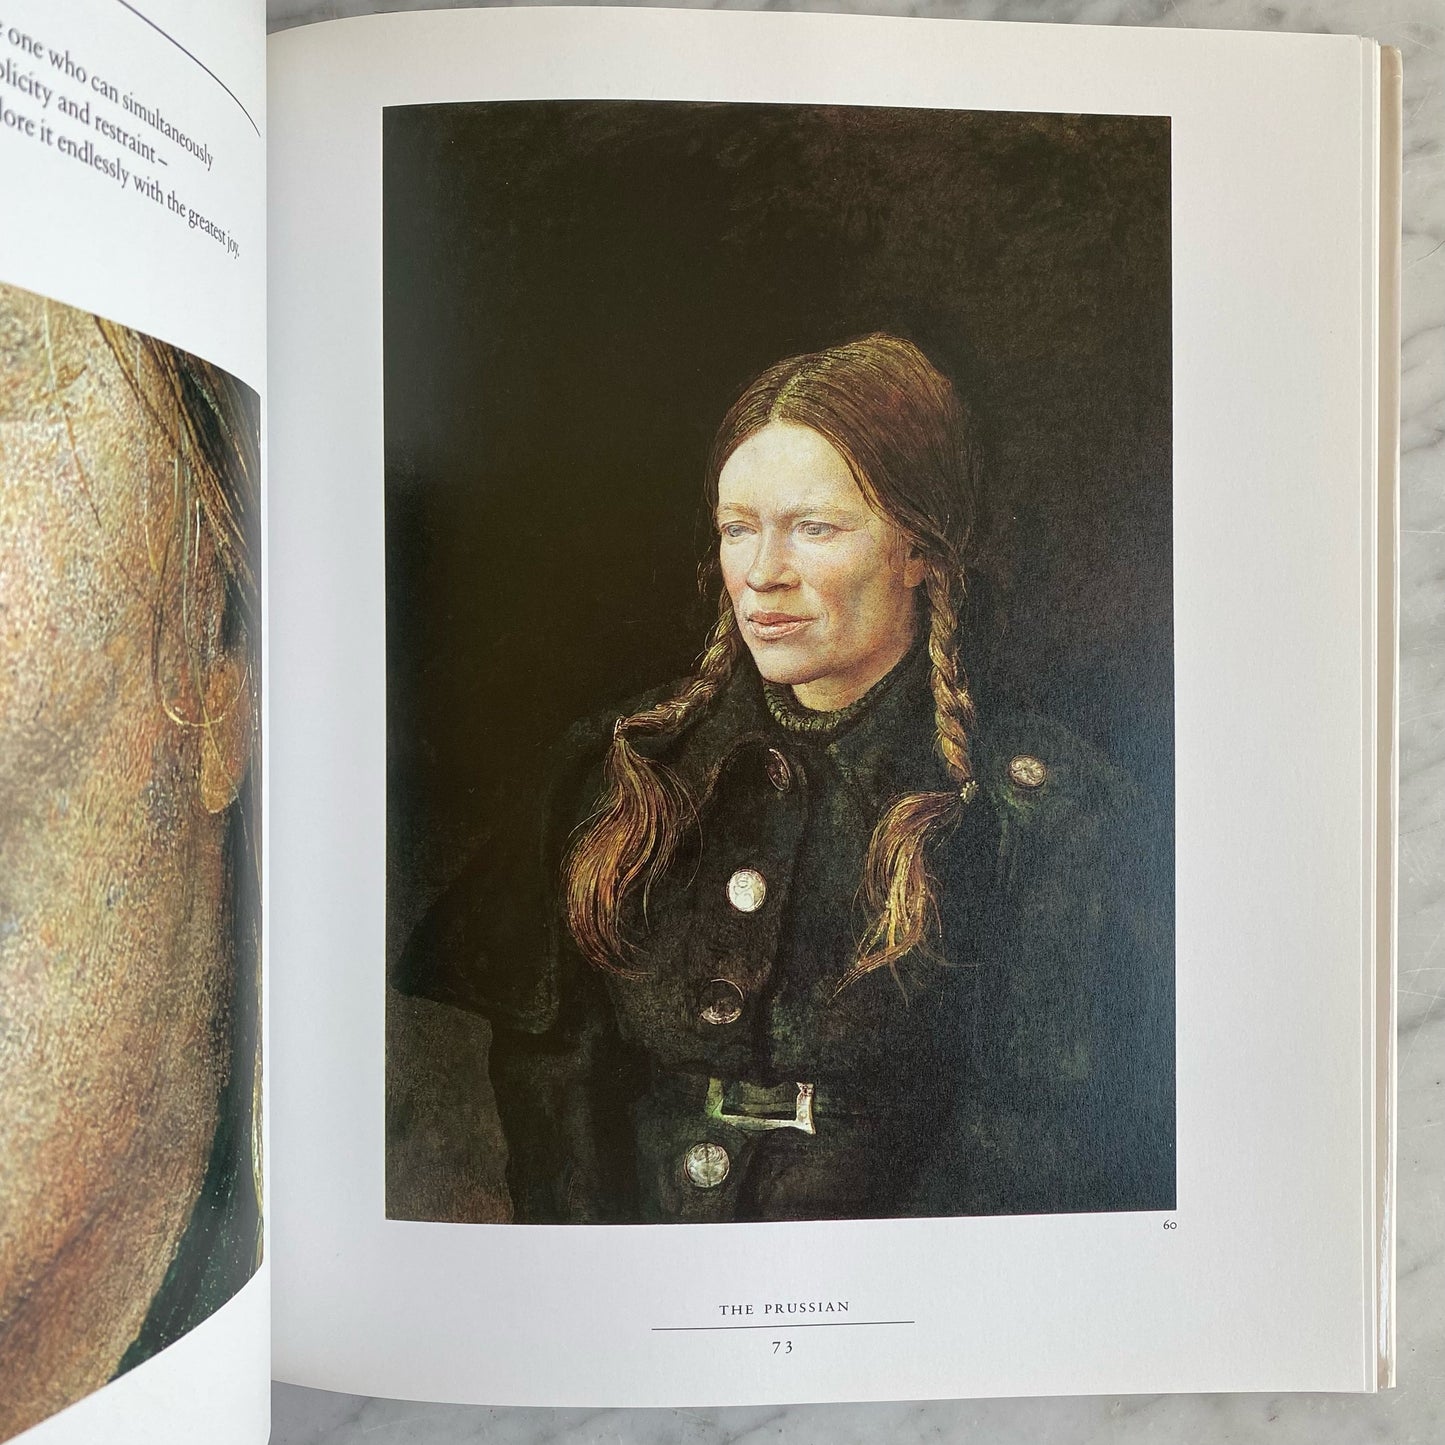 Book: Andrew Wyeth “The Helga Pictures” (1987)